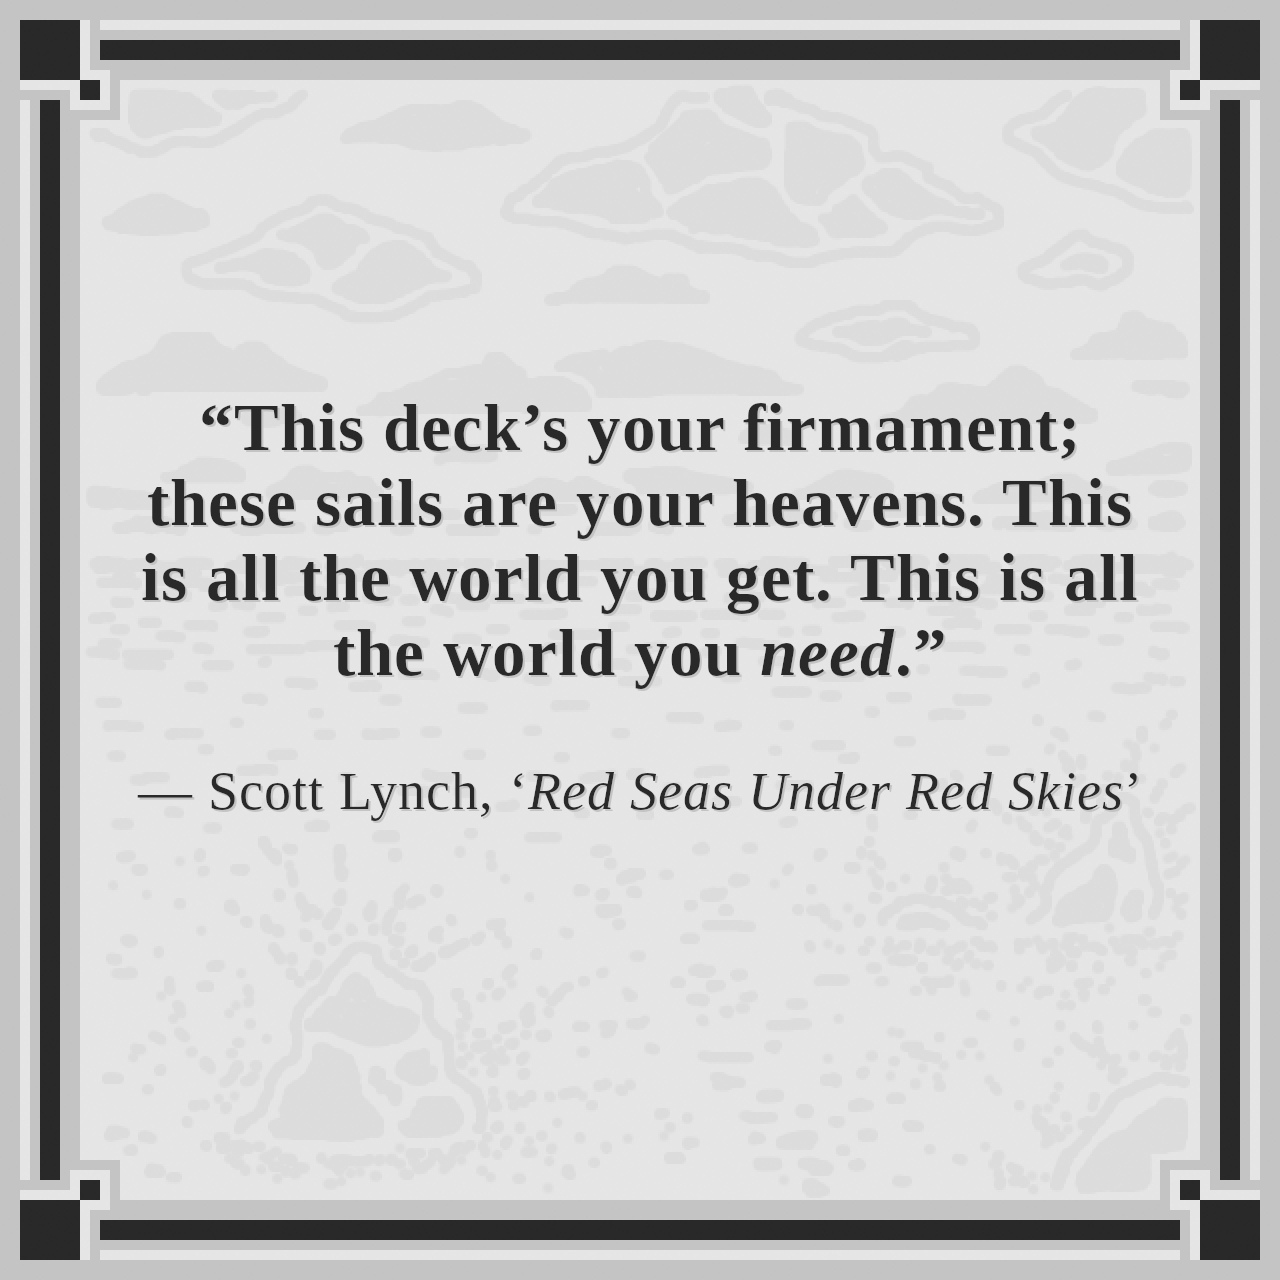 “This deck’s your firmament; these sails are your heavens. This is all the world you get. This is all the world you need.”

— Scott Lynch, ‘Red Seas Under Red Skies’